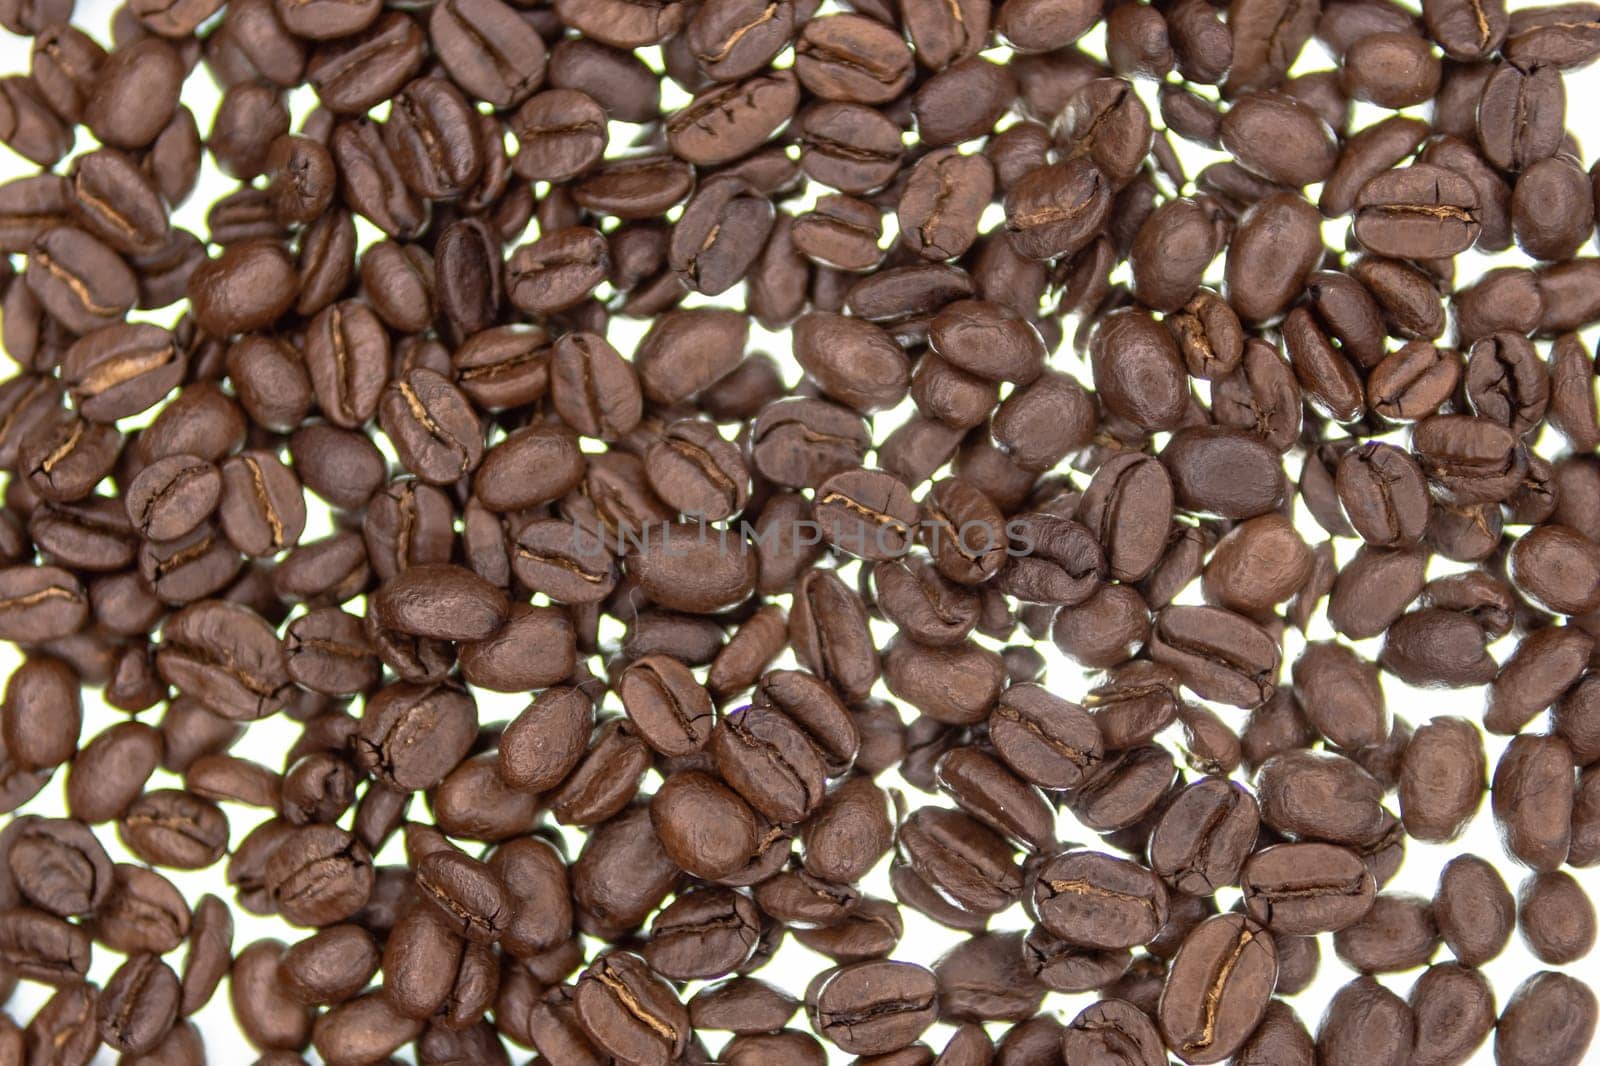 Roasted coffee beans background. coffee beans on a light background by PopOff